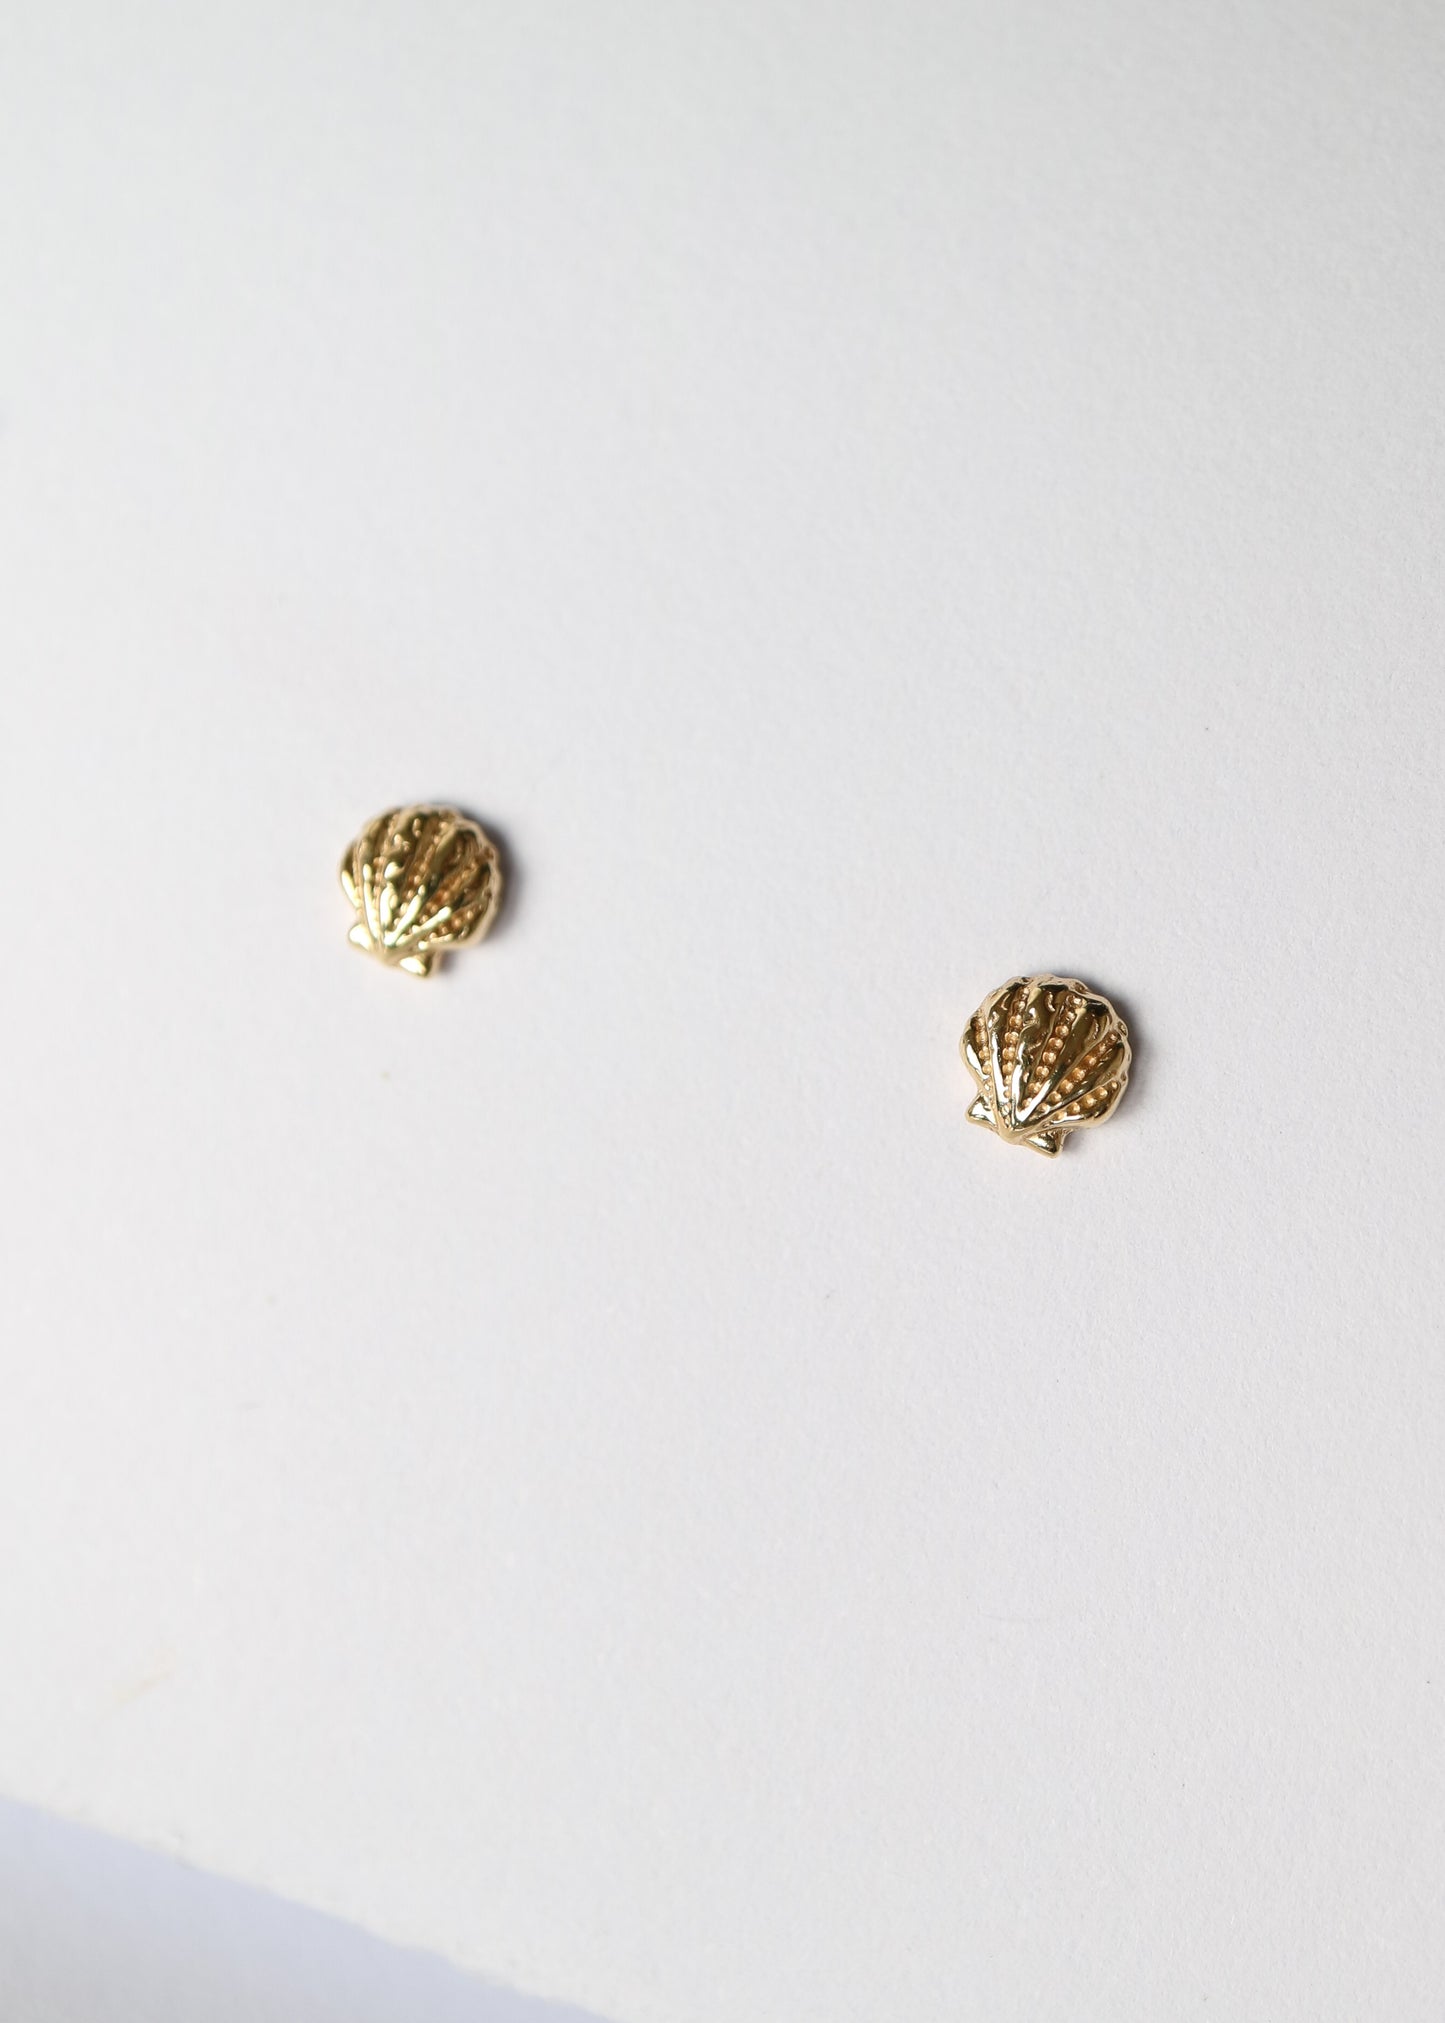 14kt Ode to the Seaside Clamshell Studs